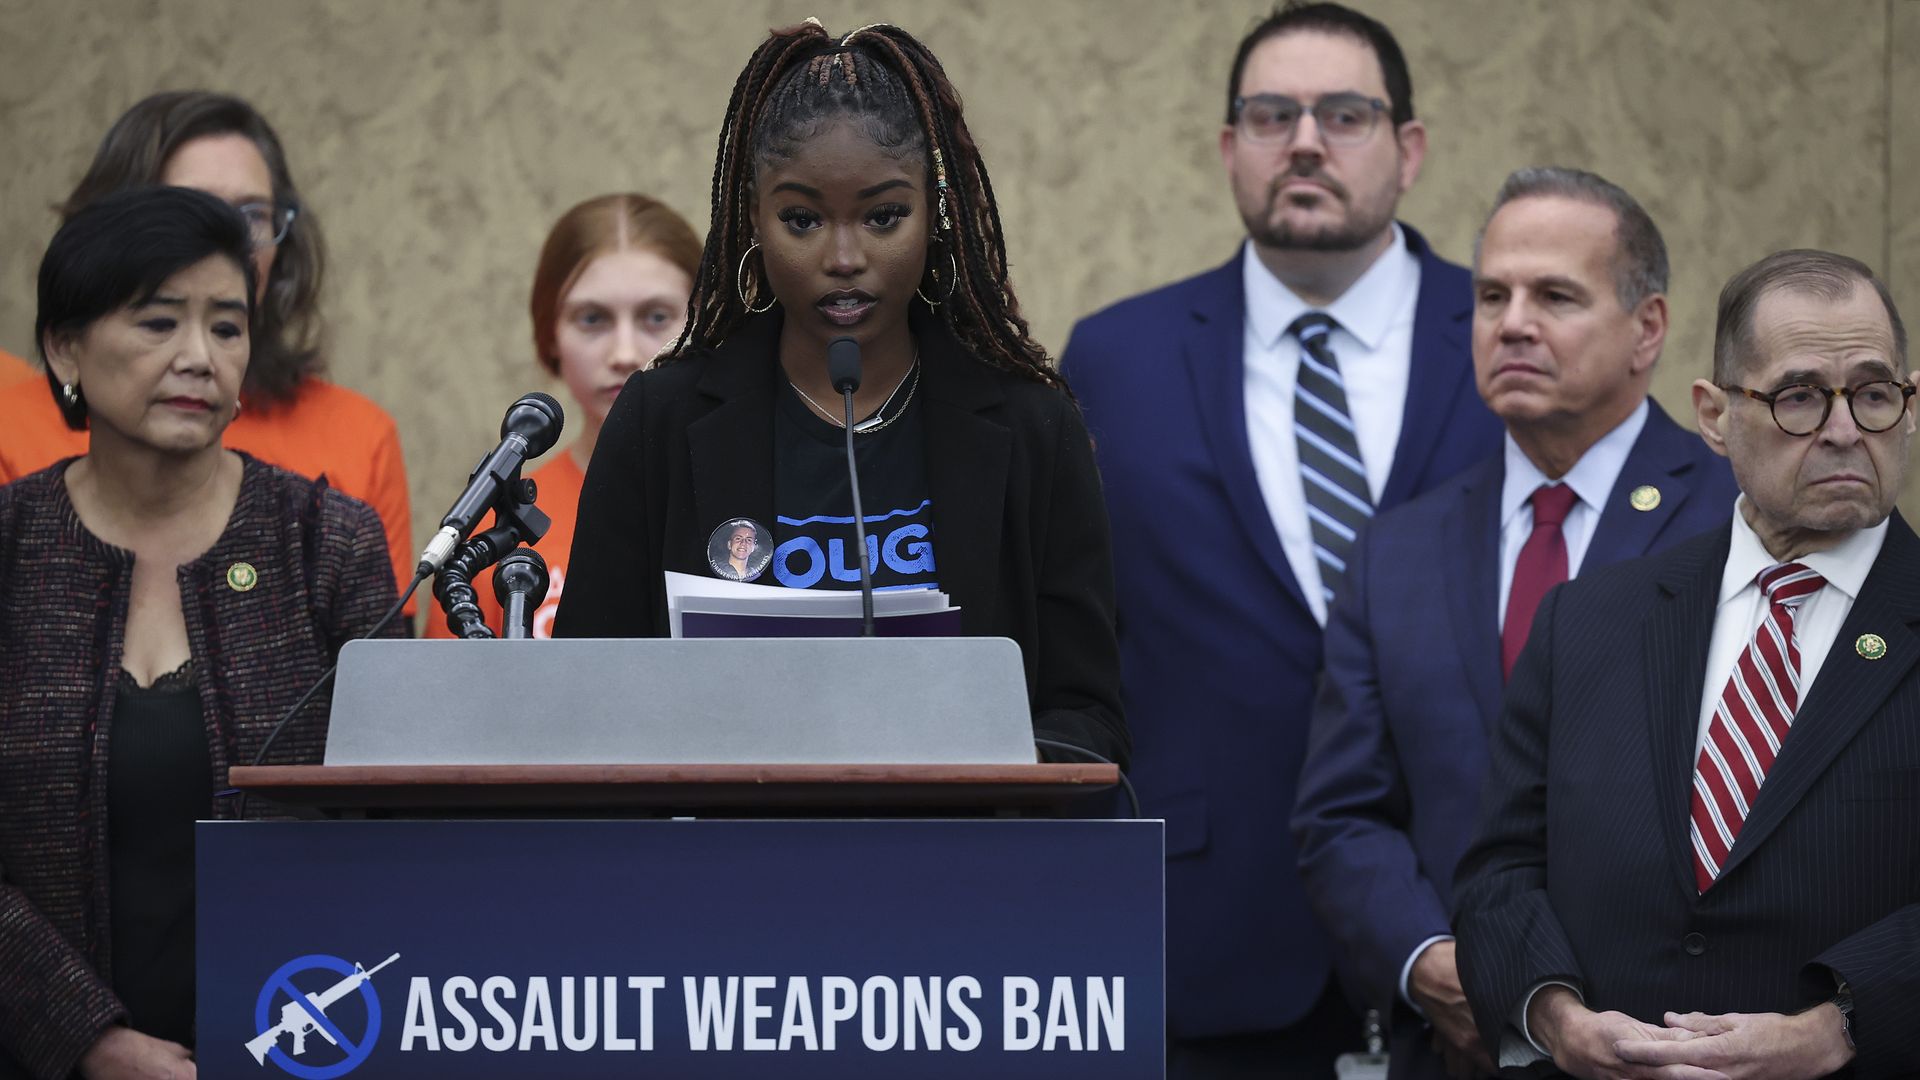 A Black girl with long hair stands at a podium that has a sign saying "Assault weapons Ban."